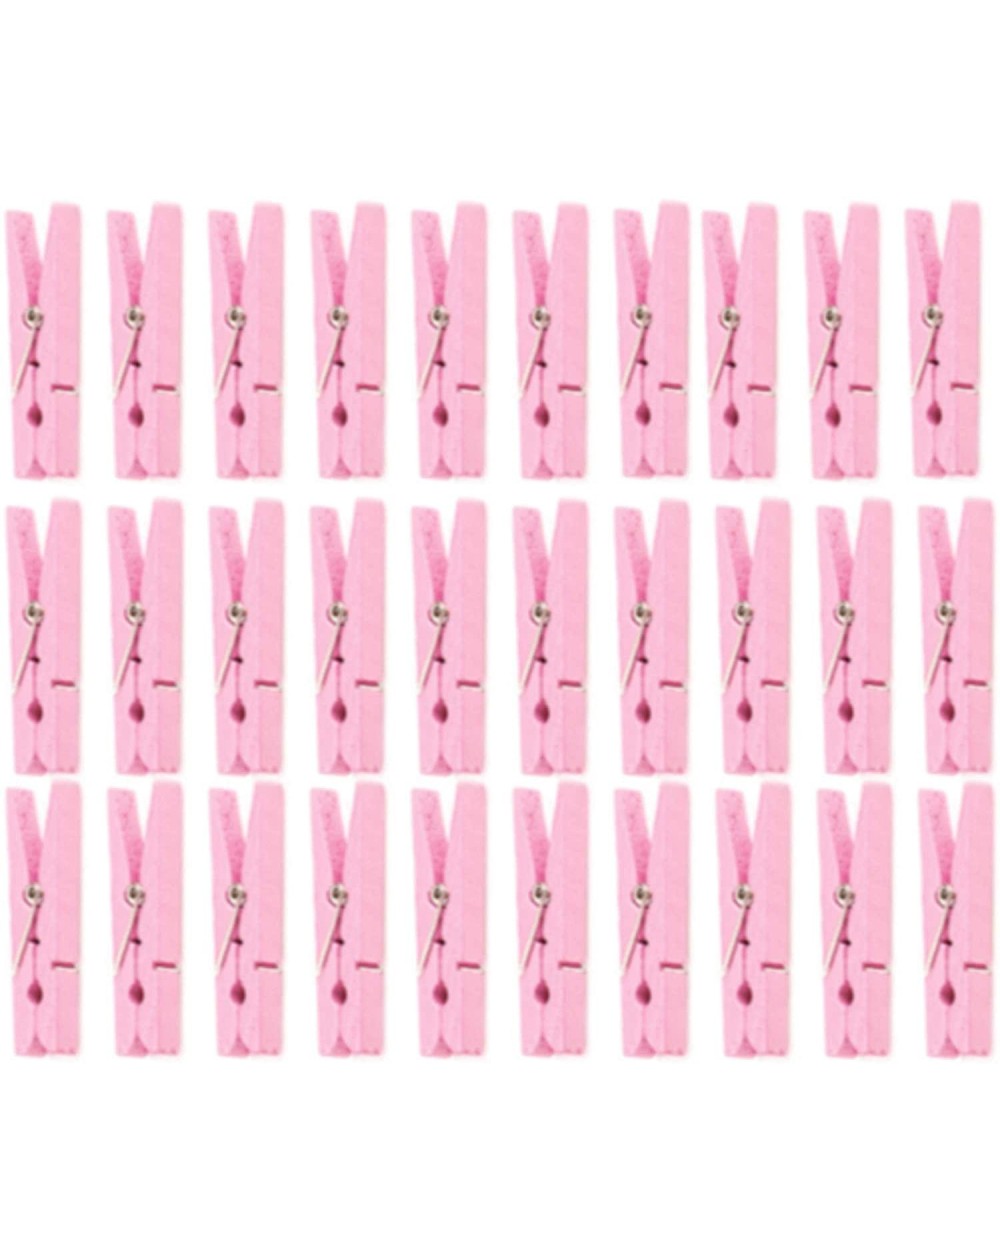 Favors Don't Say Baby Pink Clothespin Expansion Pack - Pink Clothespins 30 - C018UA767IO $11.86